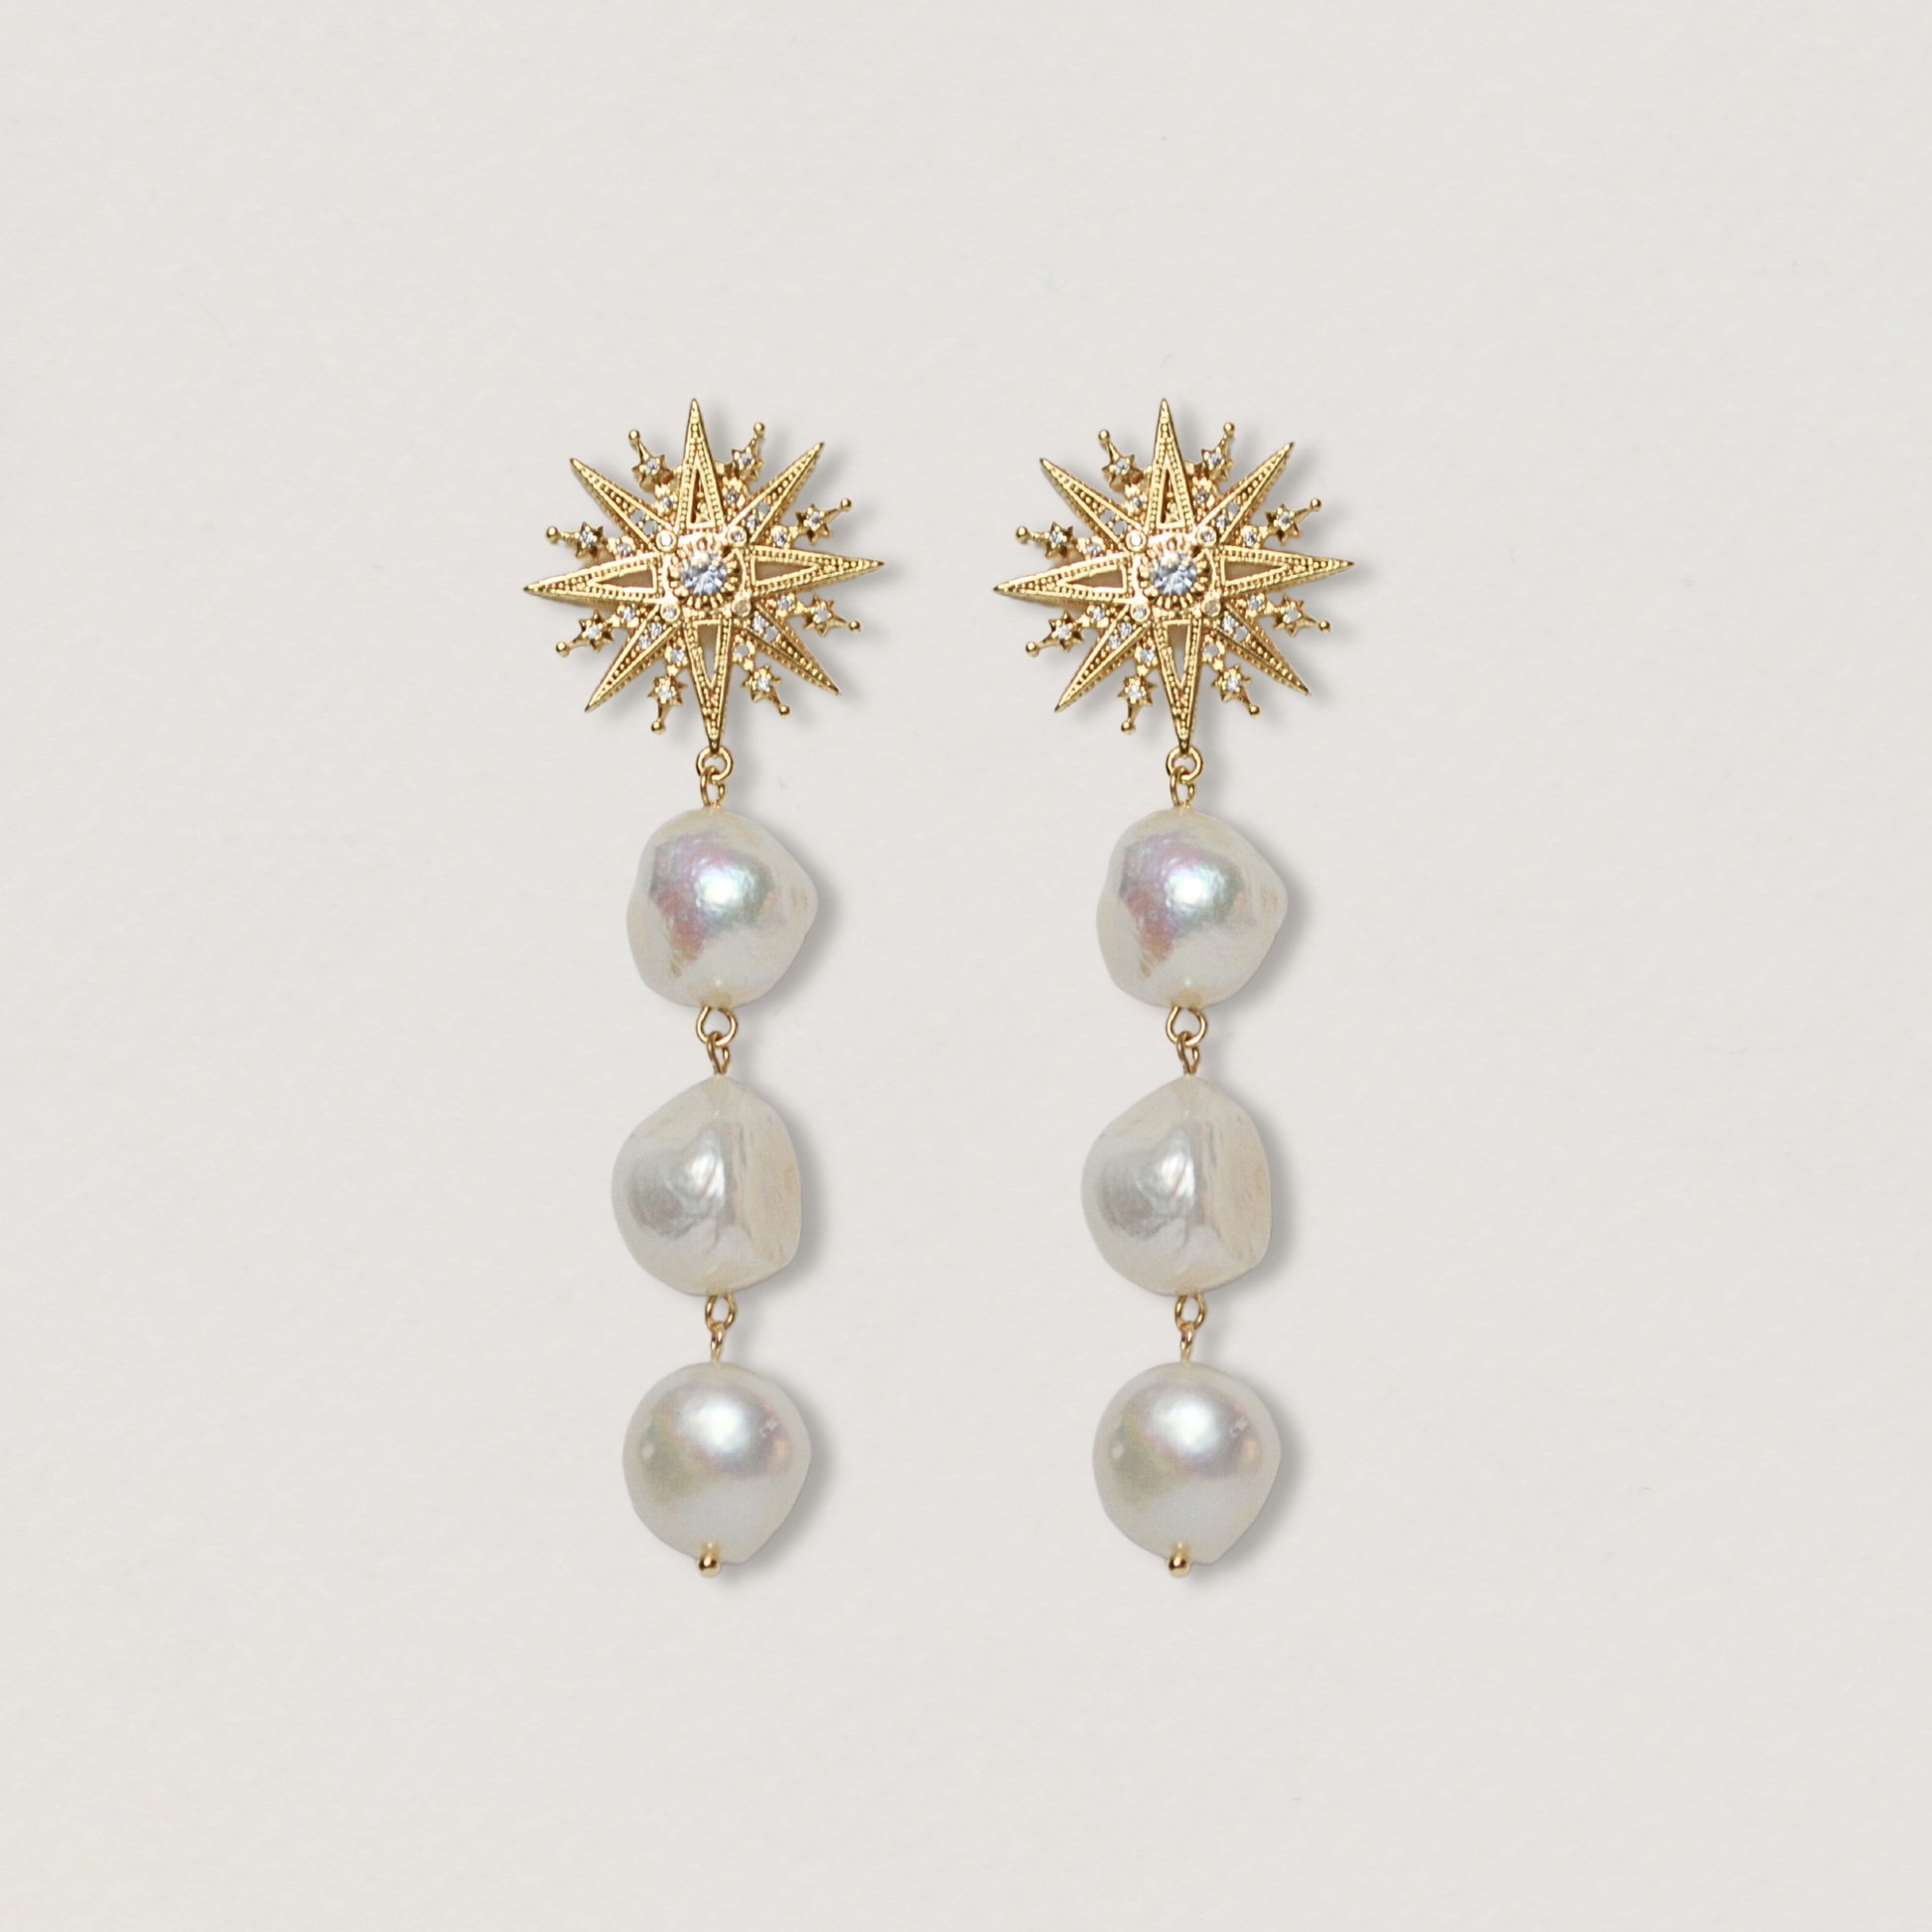 bold 3 pearl drop earrings with star stud, unique, original, handmade 